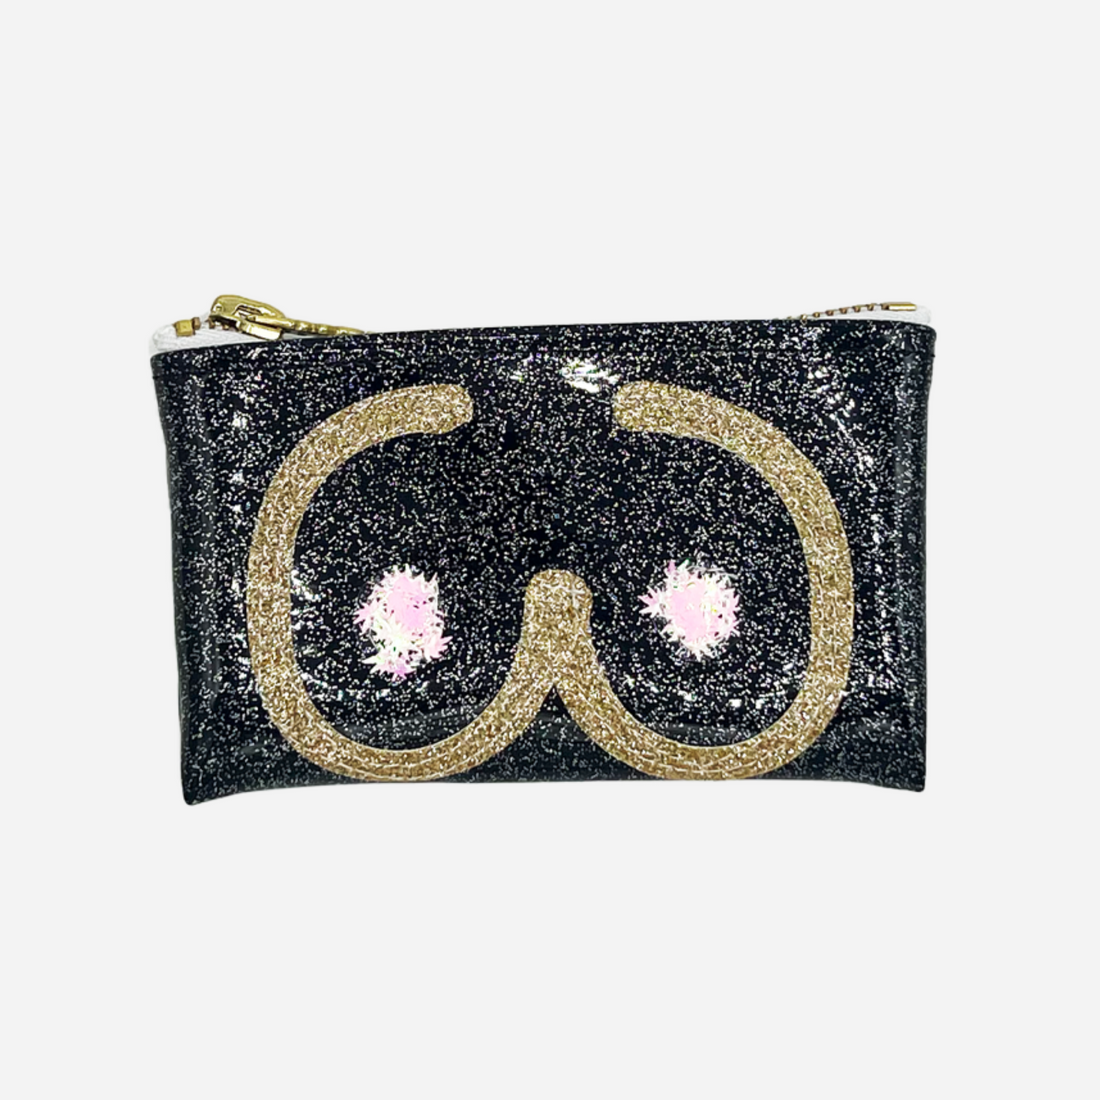 Black glitter vinyl clutch with a gold boobie silhouette and pink cannabis confetti nipples keychain design.